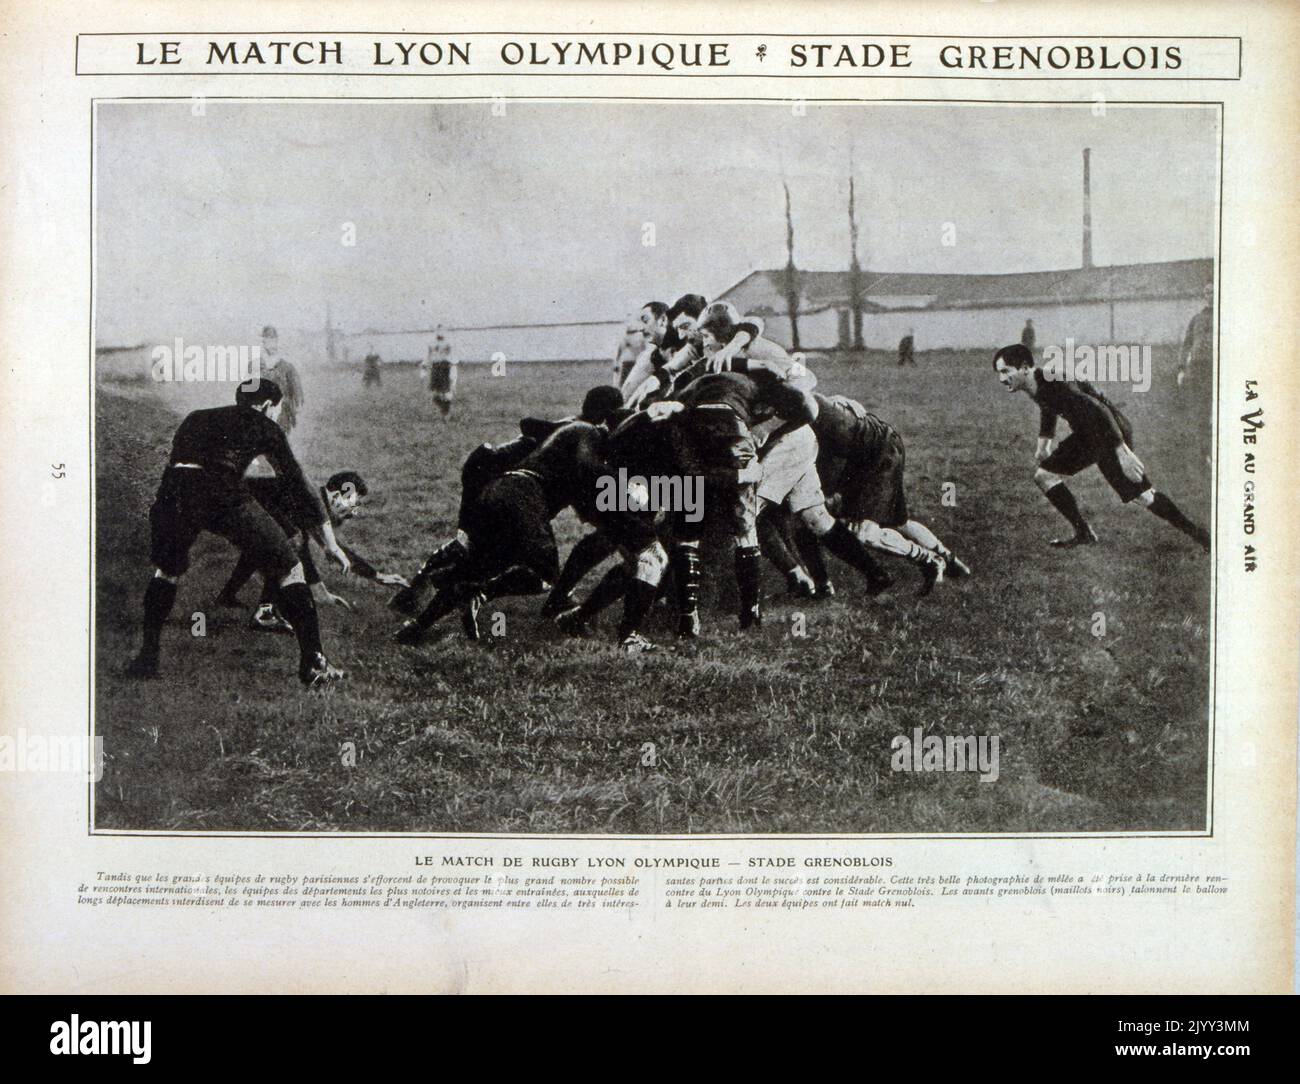 Vintage French photograph of Rugby Union players from the Lyon Olympique team in action; 1905. Le LOU, as it is traditionally known, is one of the oldest sports clubs in France and among the first outside Paris to have set up a rugby section. The club's original name was Racing Club, the result of a merger of the Racing Club de Vaise and the Rugby Club de Lyon. It was renamed Racing et Cercles Reunis in 1902 after several other clubs joined it, then a few months later Lyon Olympique Stock Photo